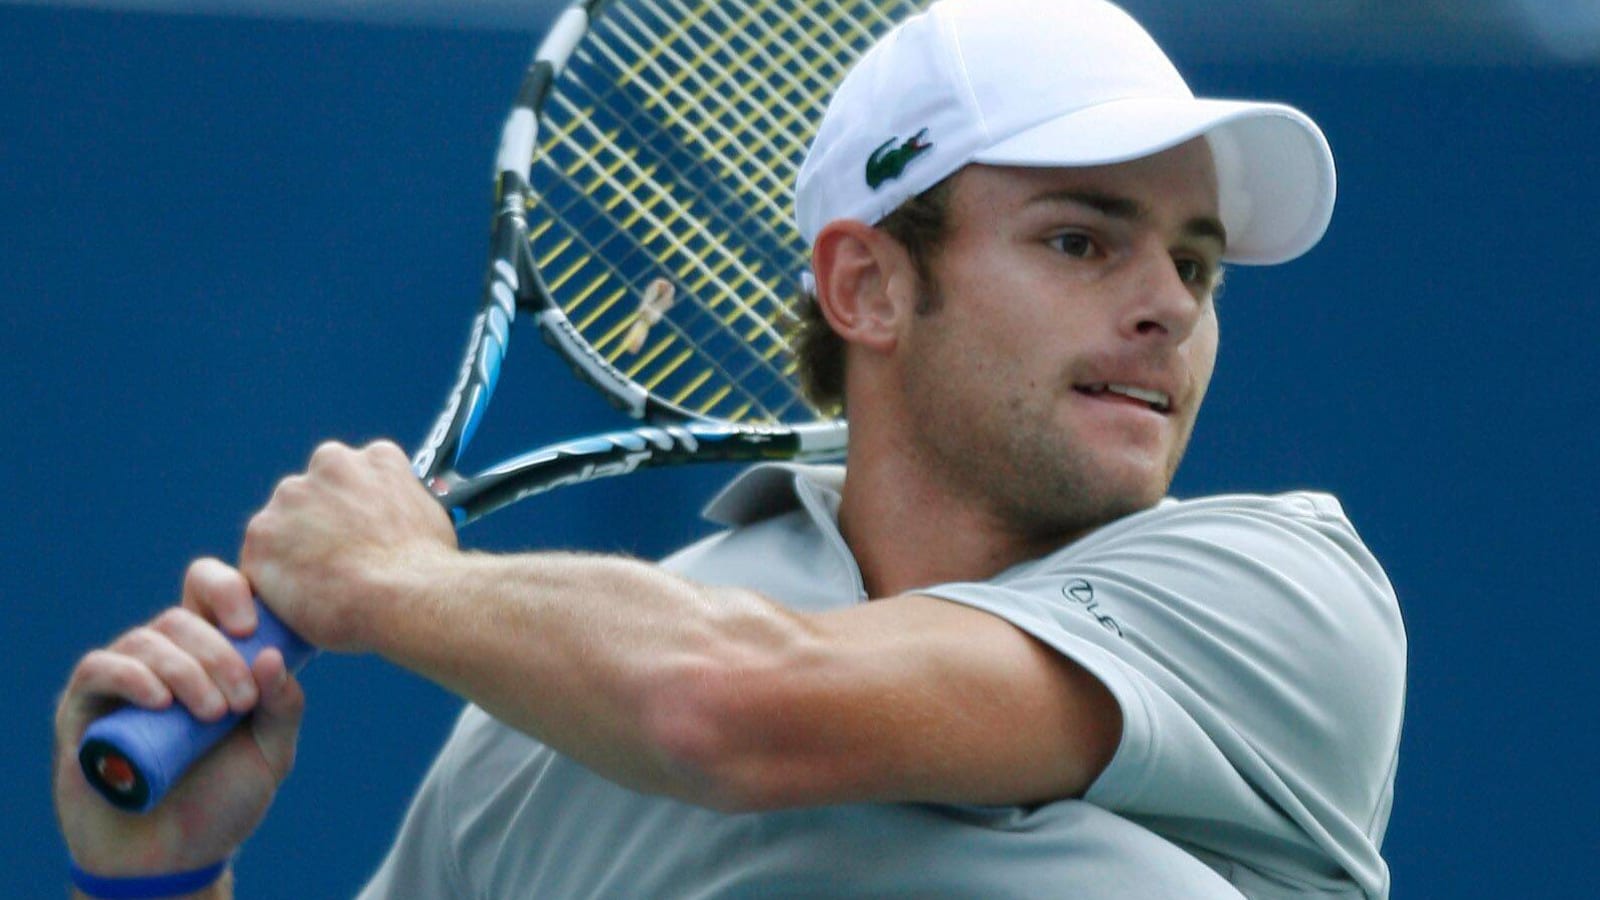 McEnore, Roddick & Agassi To Compete in Pickleball Exhibition Event